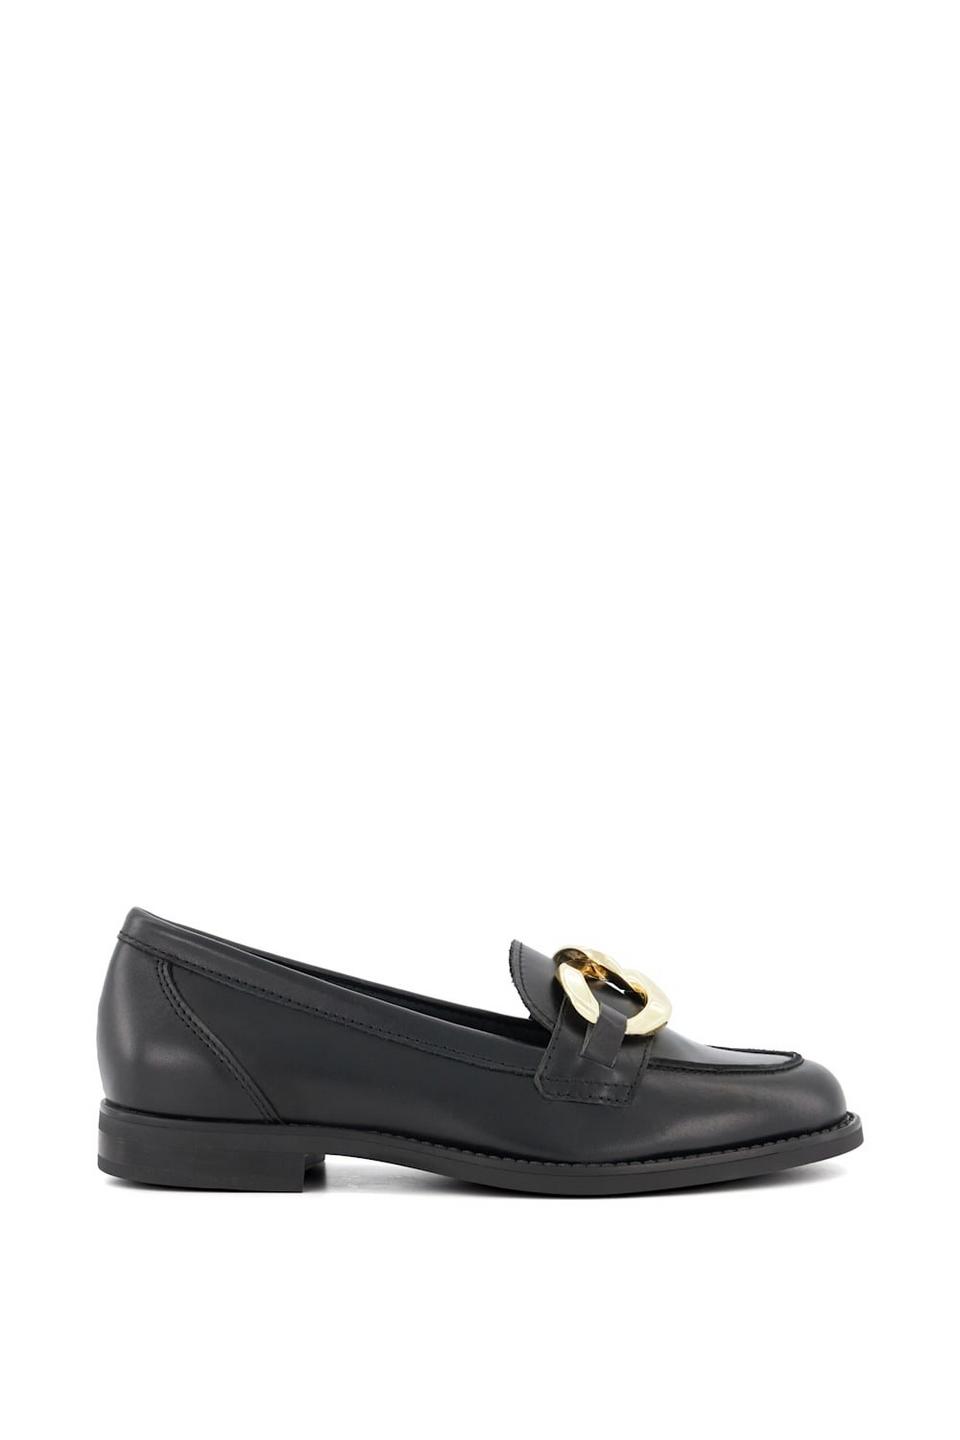 Flats | 'Goddess' Leather Loafers | Dune London